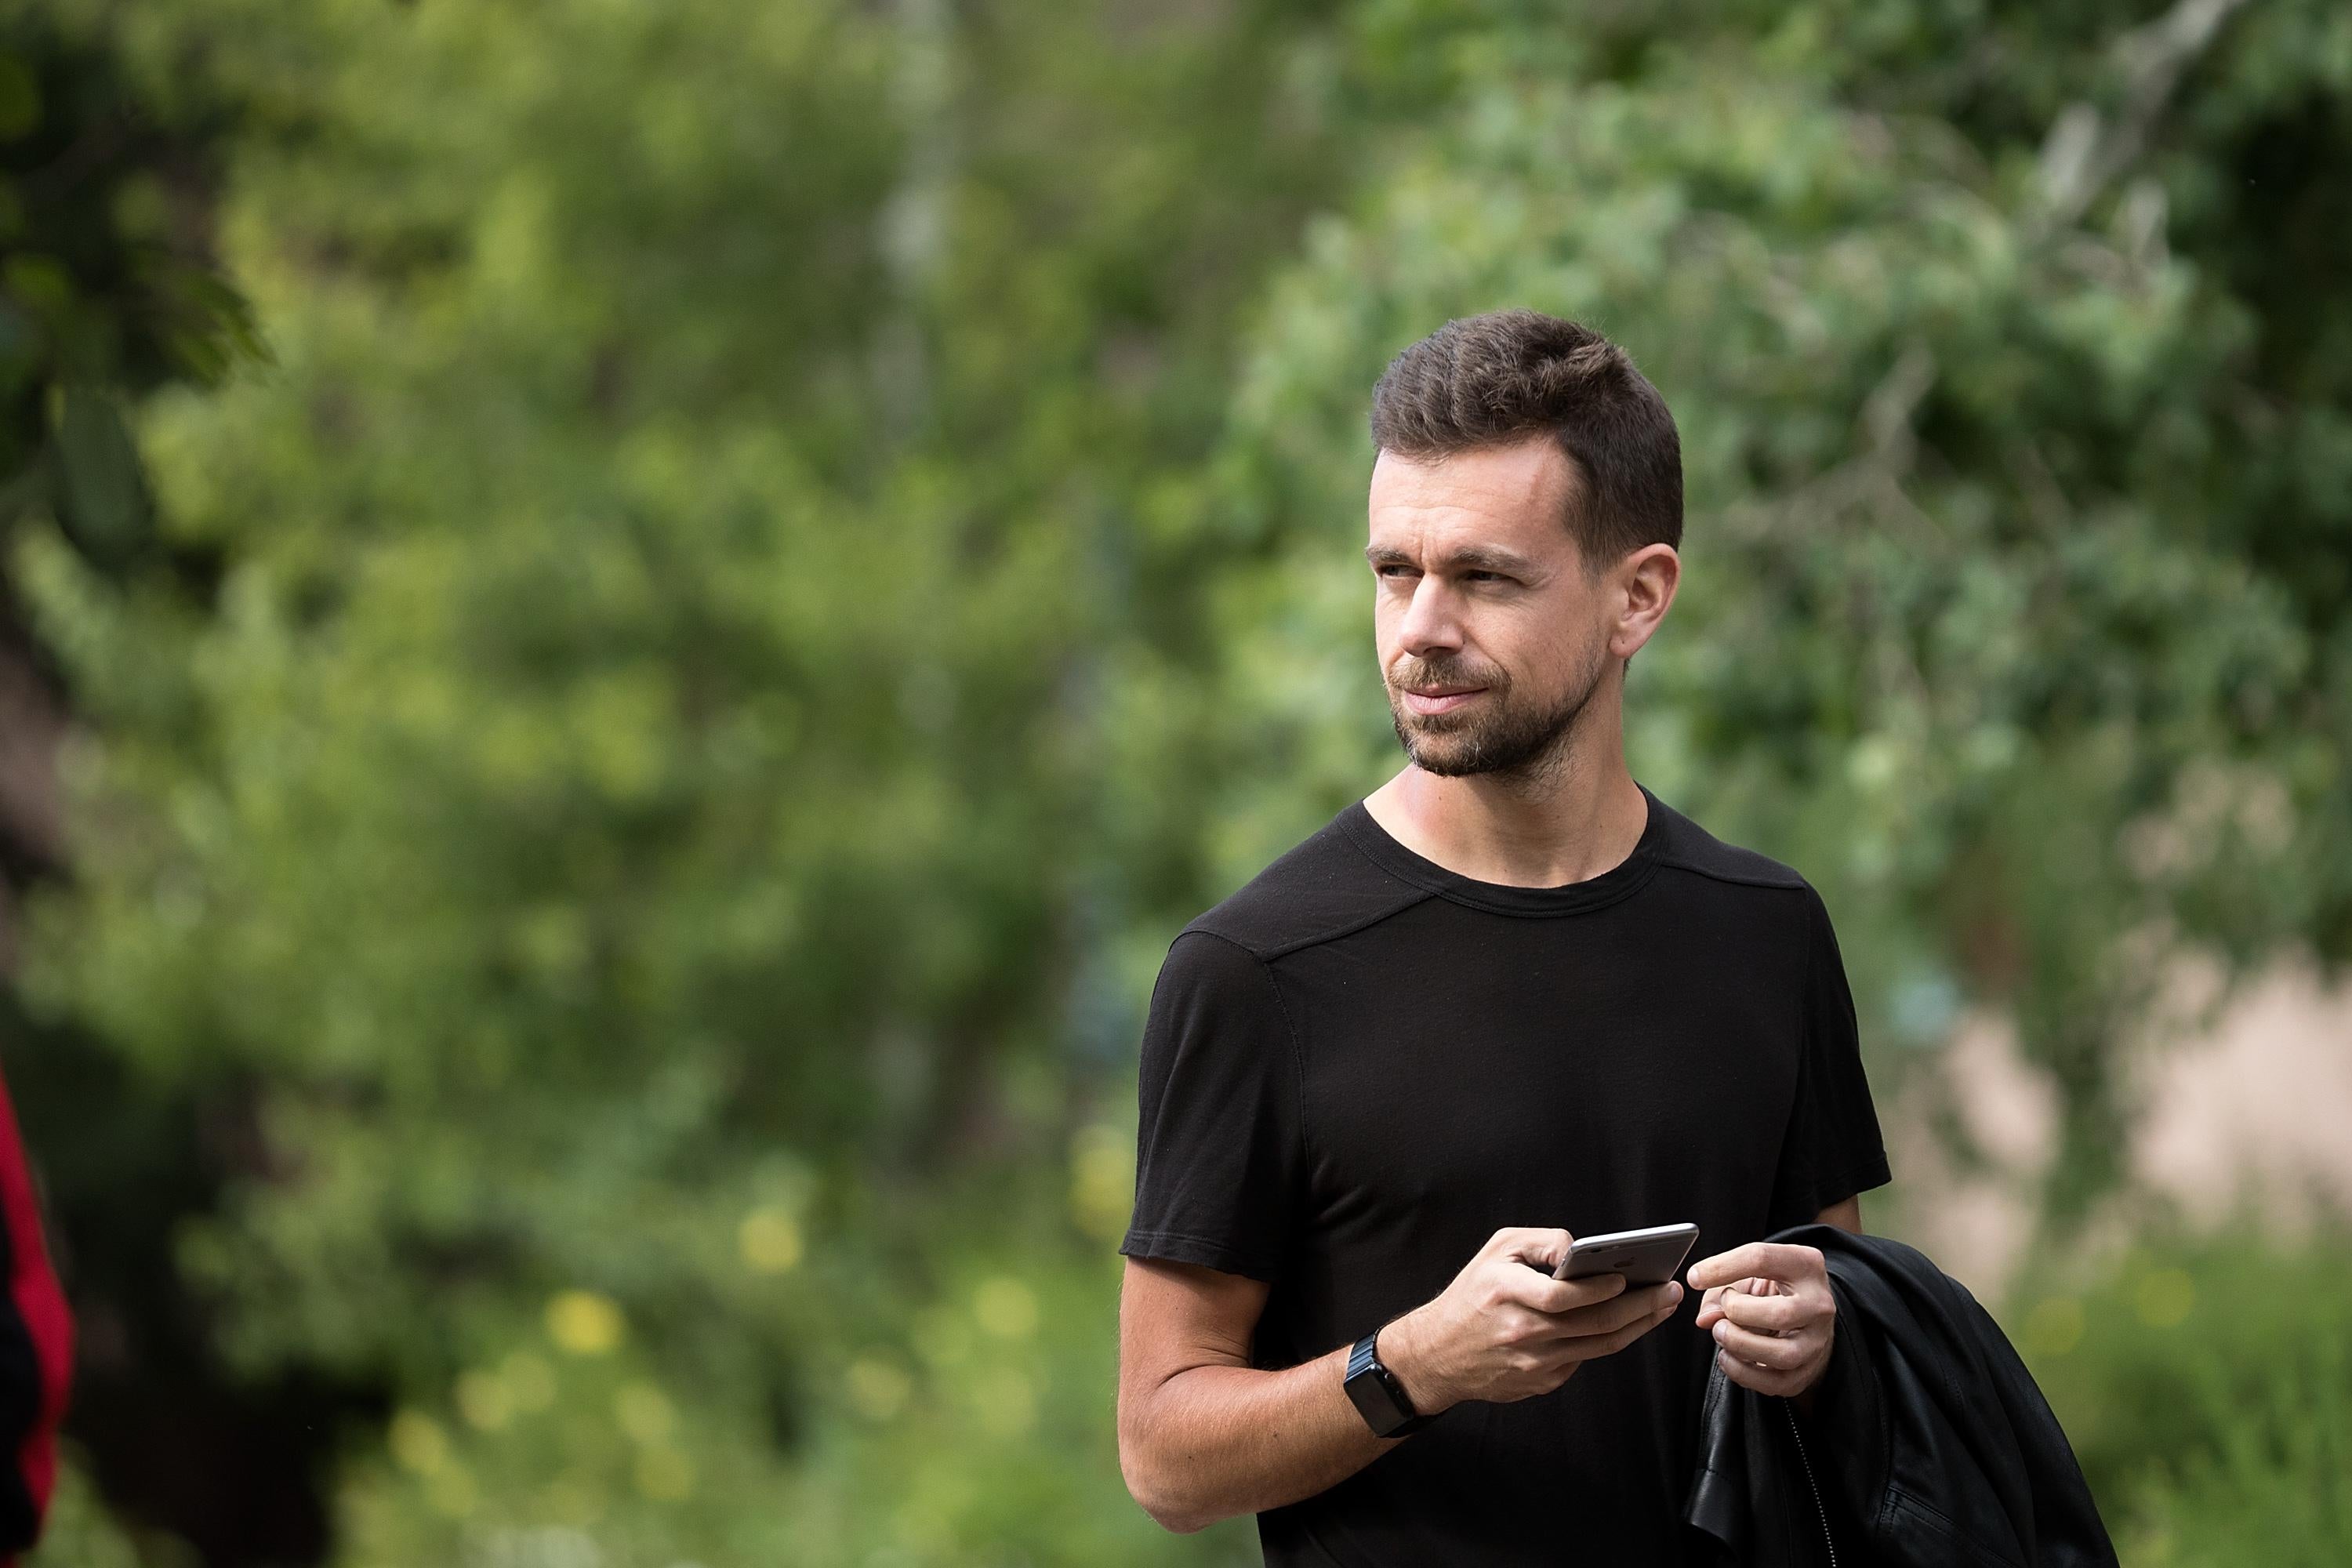 Jack Dorsey in front of some greenery, wearing all black, and holding his mobile phone.